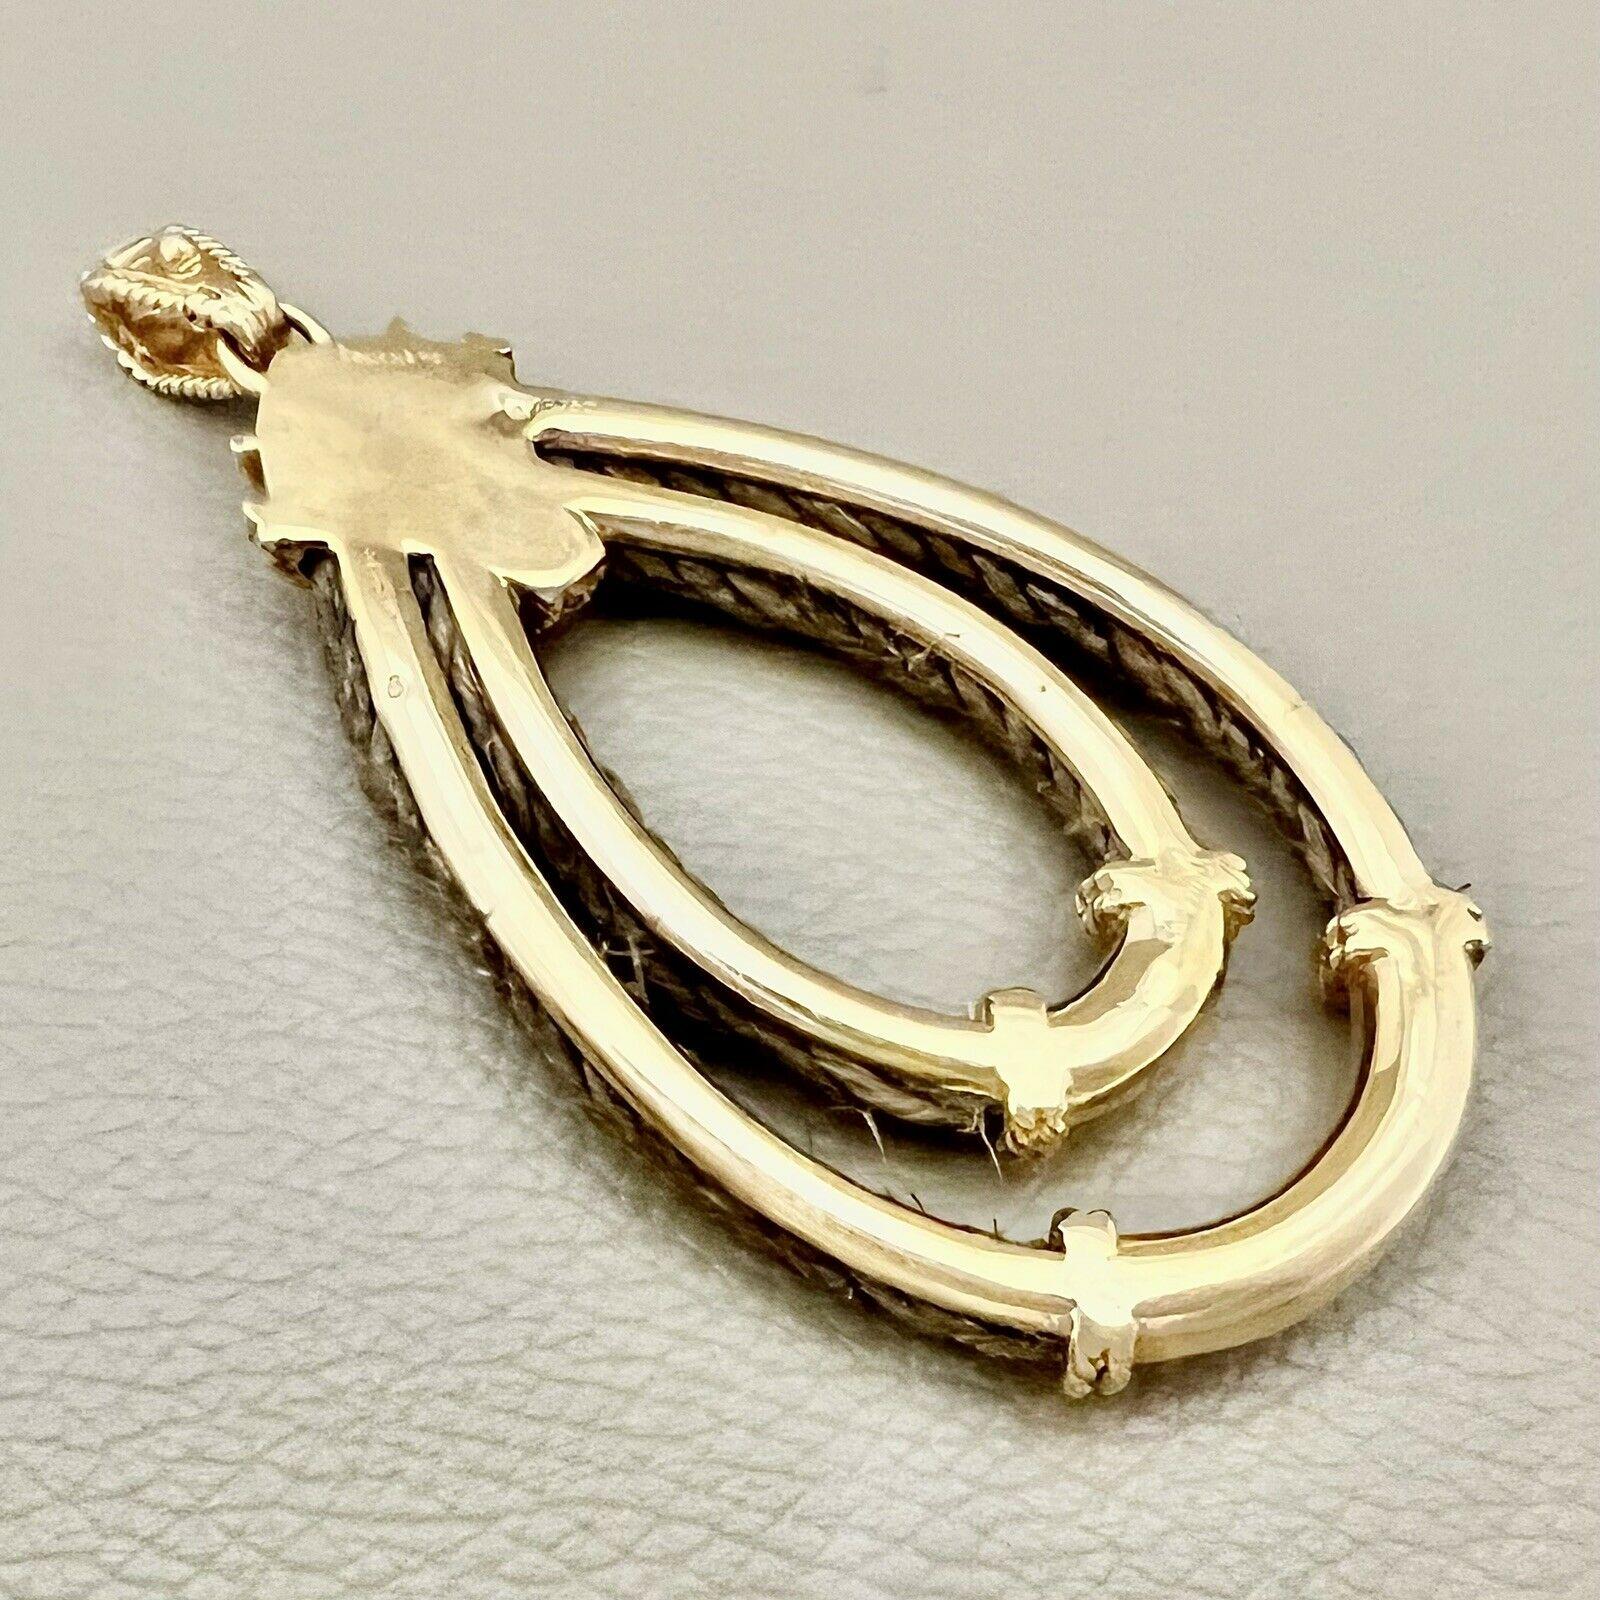 Boucheron Paris by Andre Vassort 18k Yellow Gold & Rope Mariner Motif Pendant Vintage Rare


Here is your chance to purchase a beautiful and highly collectible designer pendant.  Truly a great piece at a great price! 

Weight: 30 grams

Dimensions: